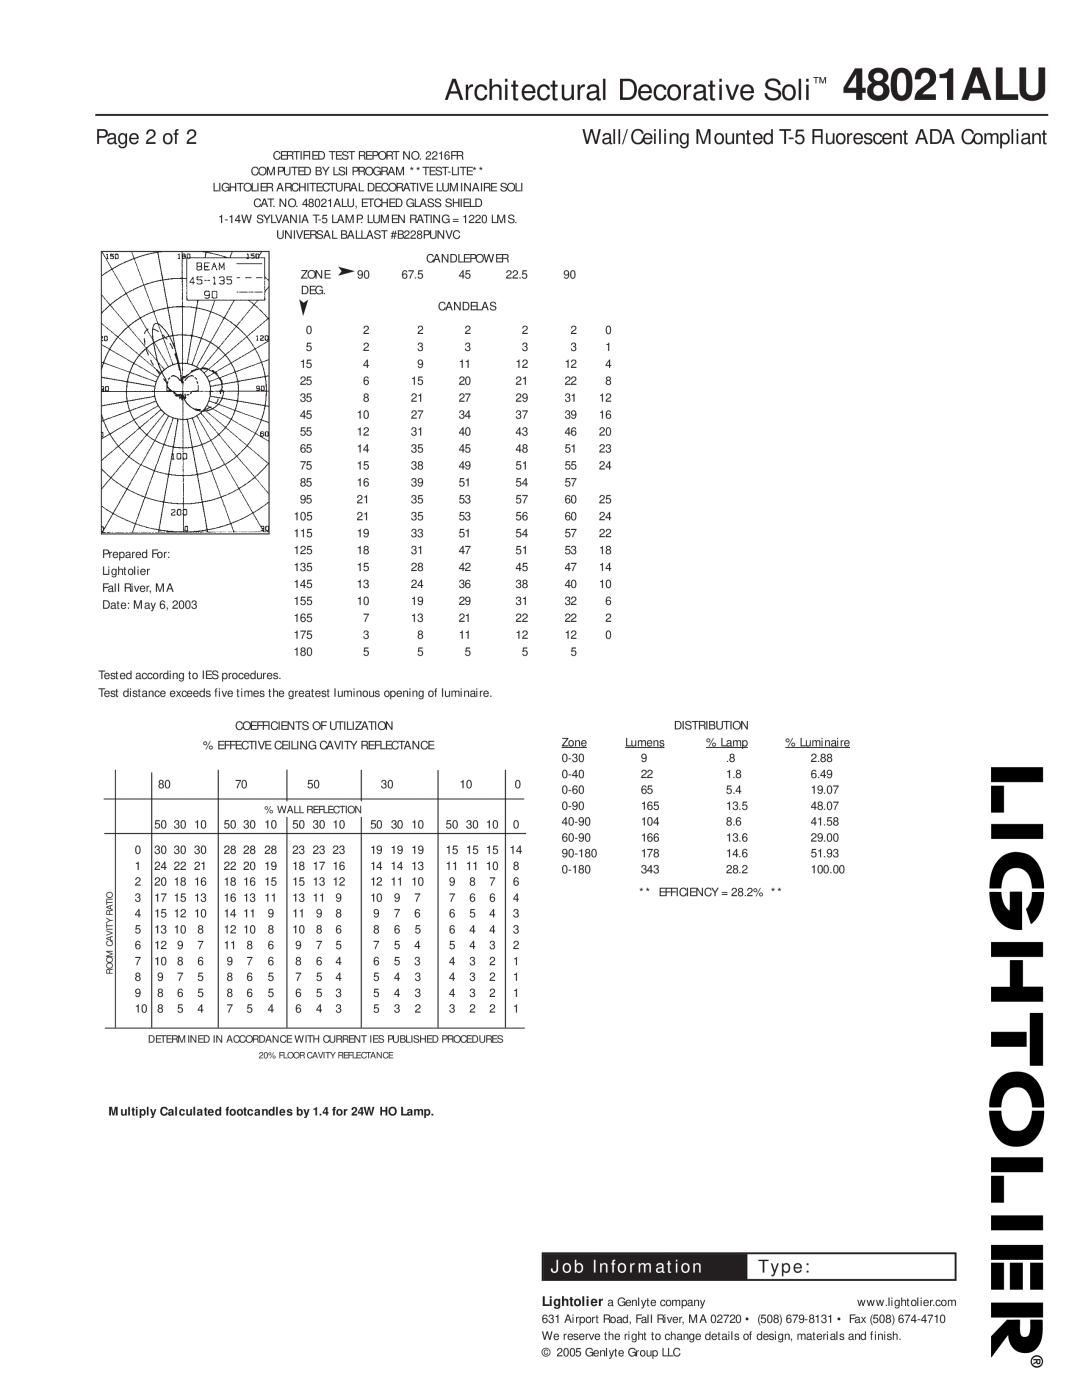 Lightolier Page 2 of, Architectural Decorative Soli 48021ALU, Wall/Ceiling Mounted T-5Fluorescent ADA Compliant, Type 